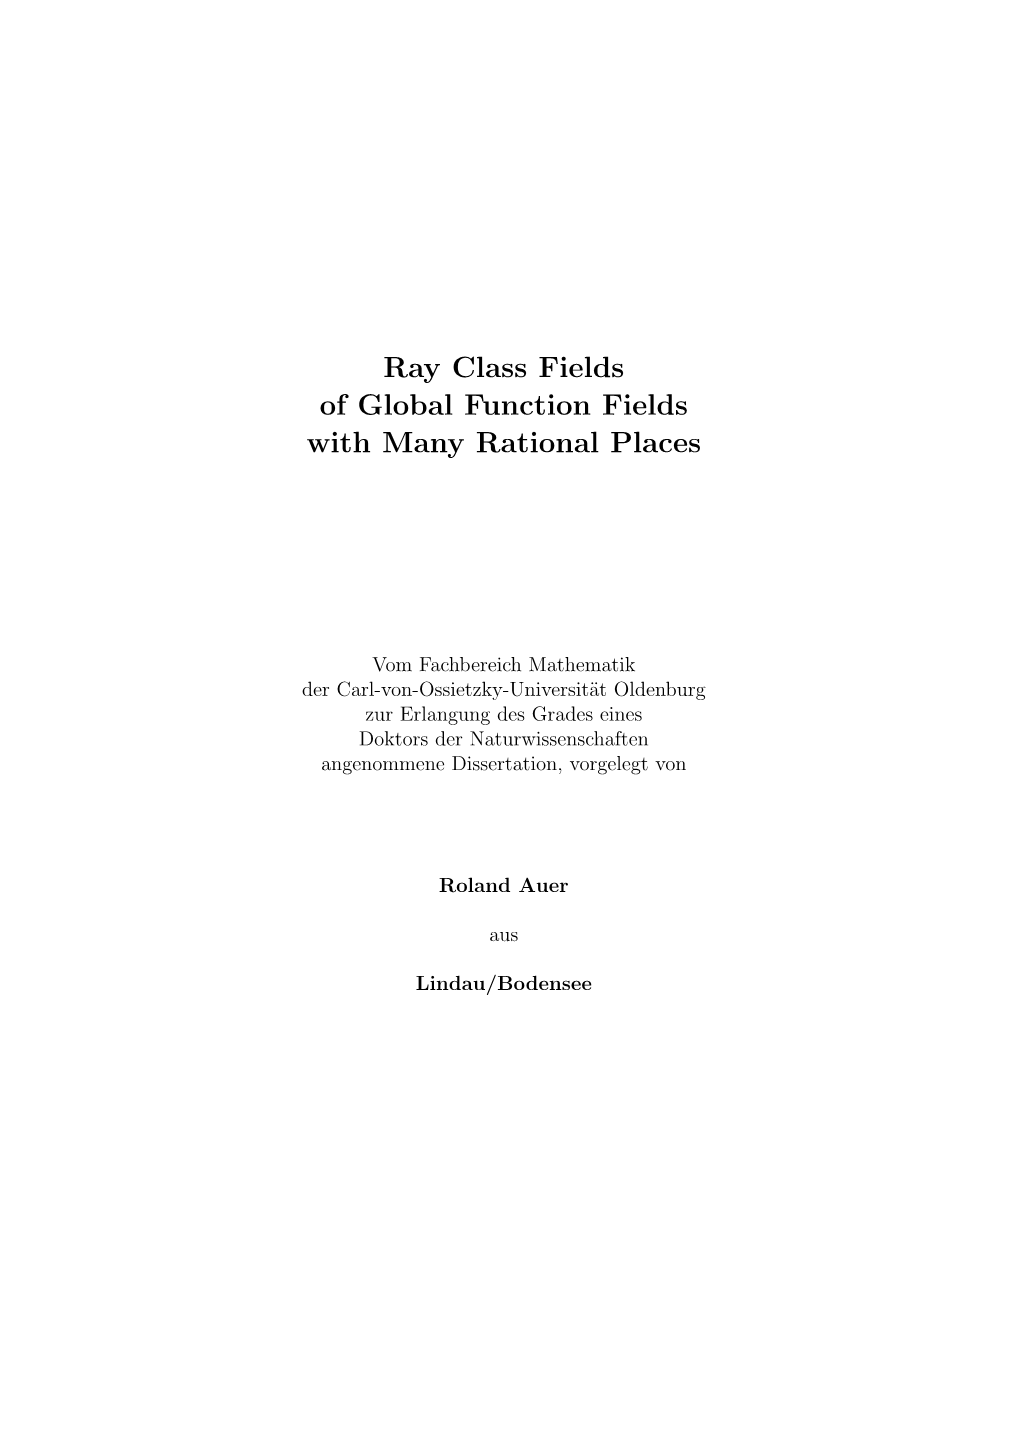 Ray Class Fields of Global Function Fields with Many Rational Places